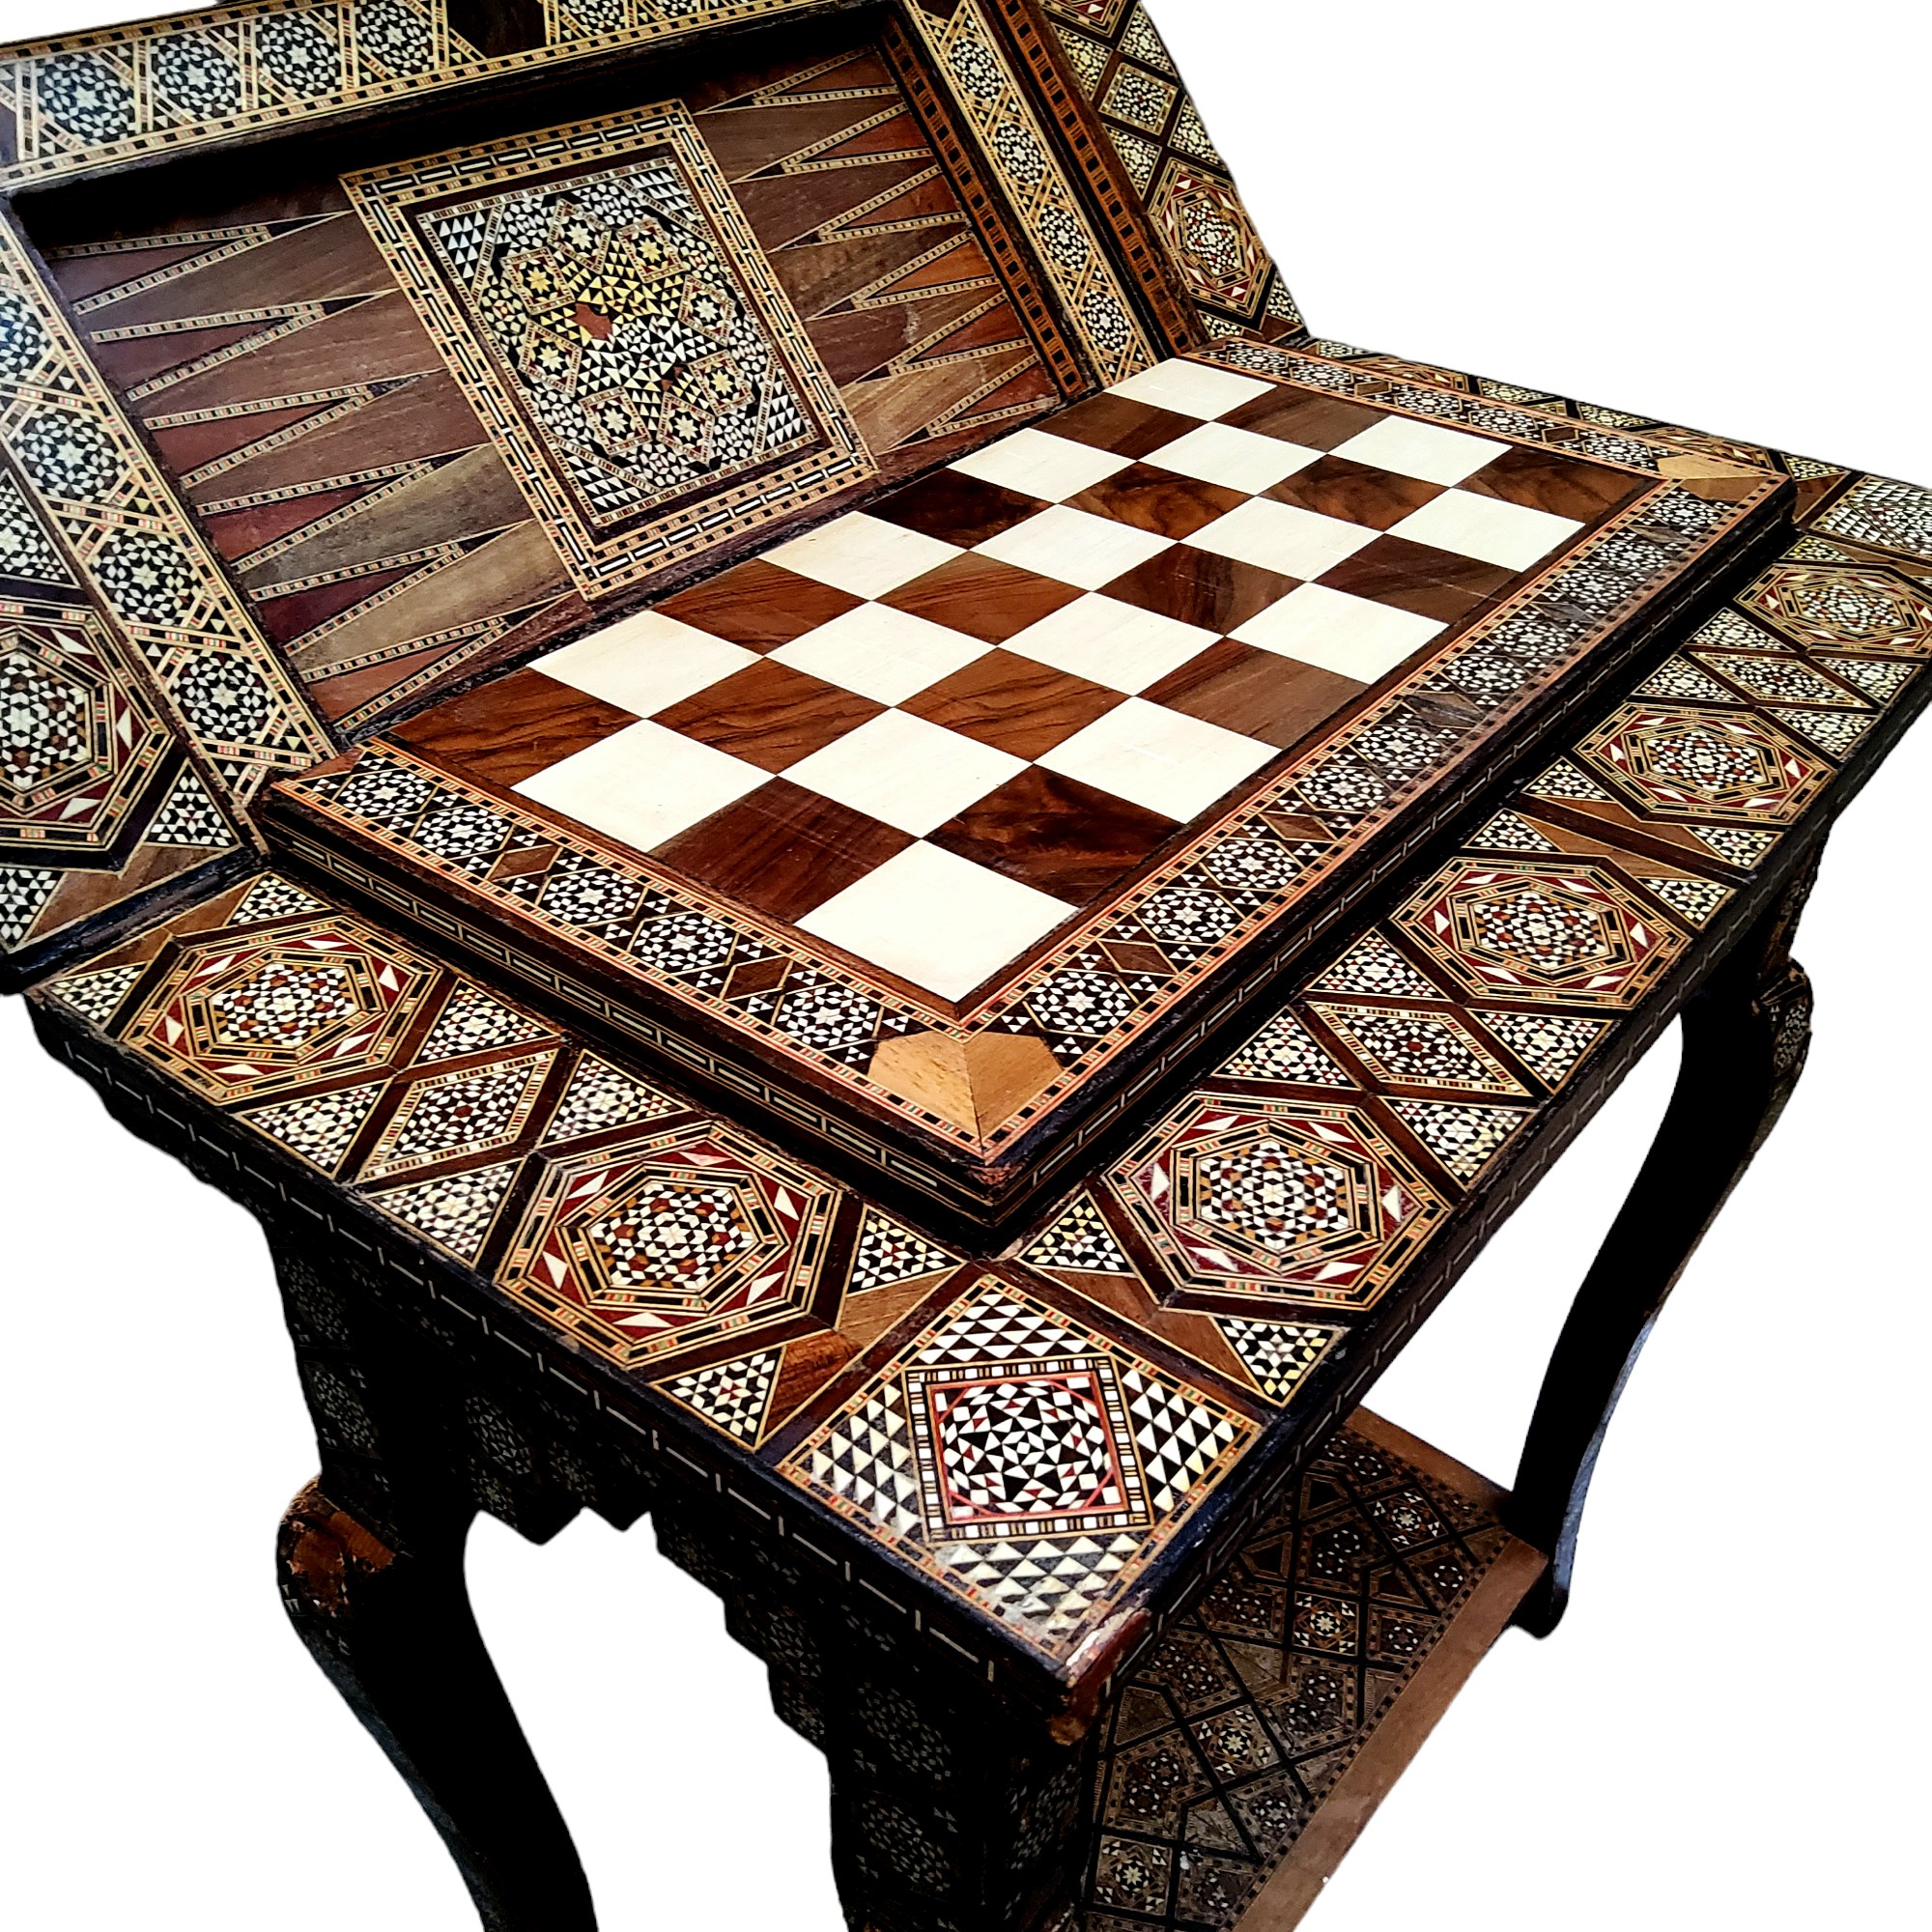 A 19th century Anglo Indian games compendium, the folding vizagapatam/micromosaic inset table - Image 2 of 7